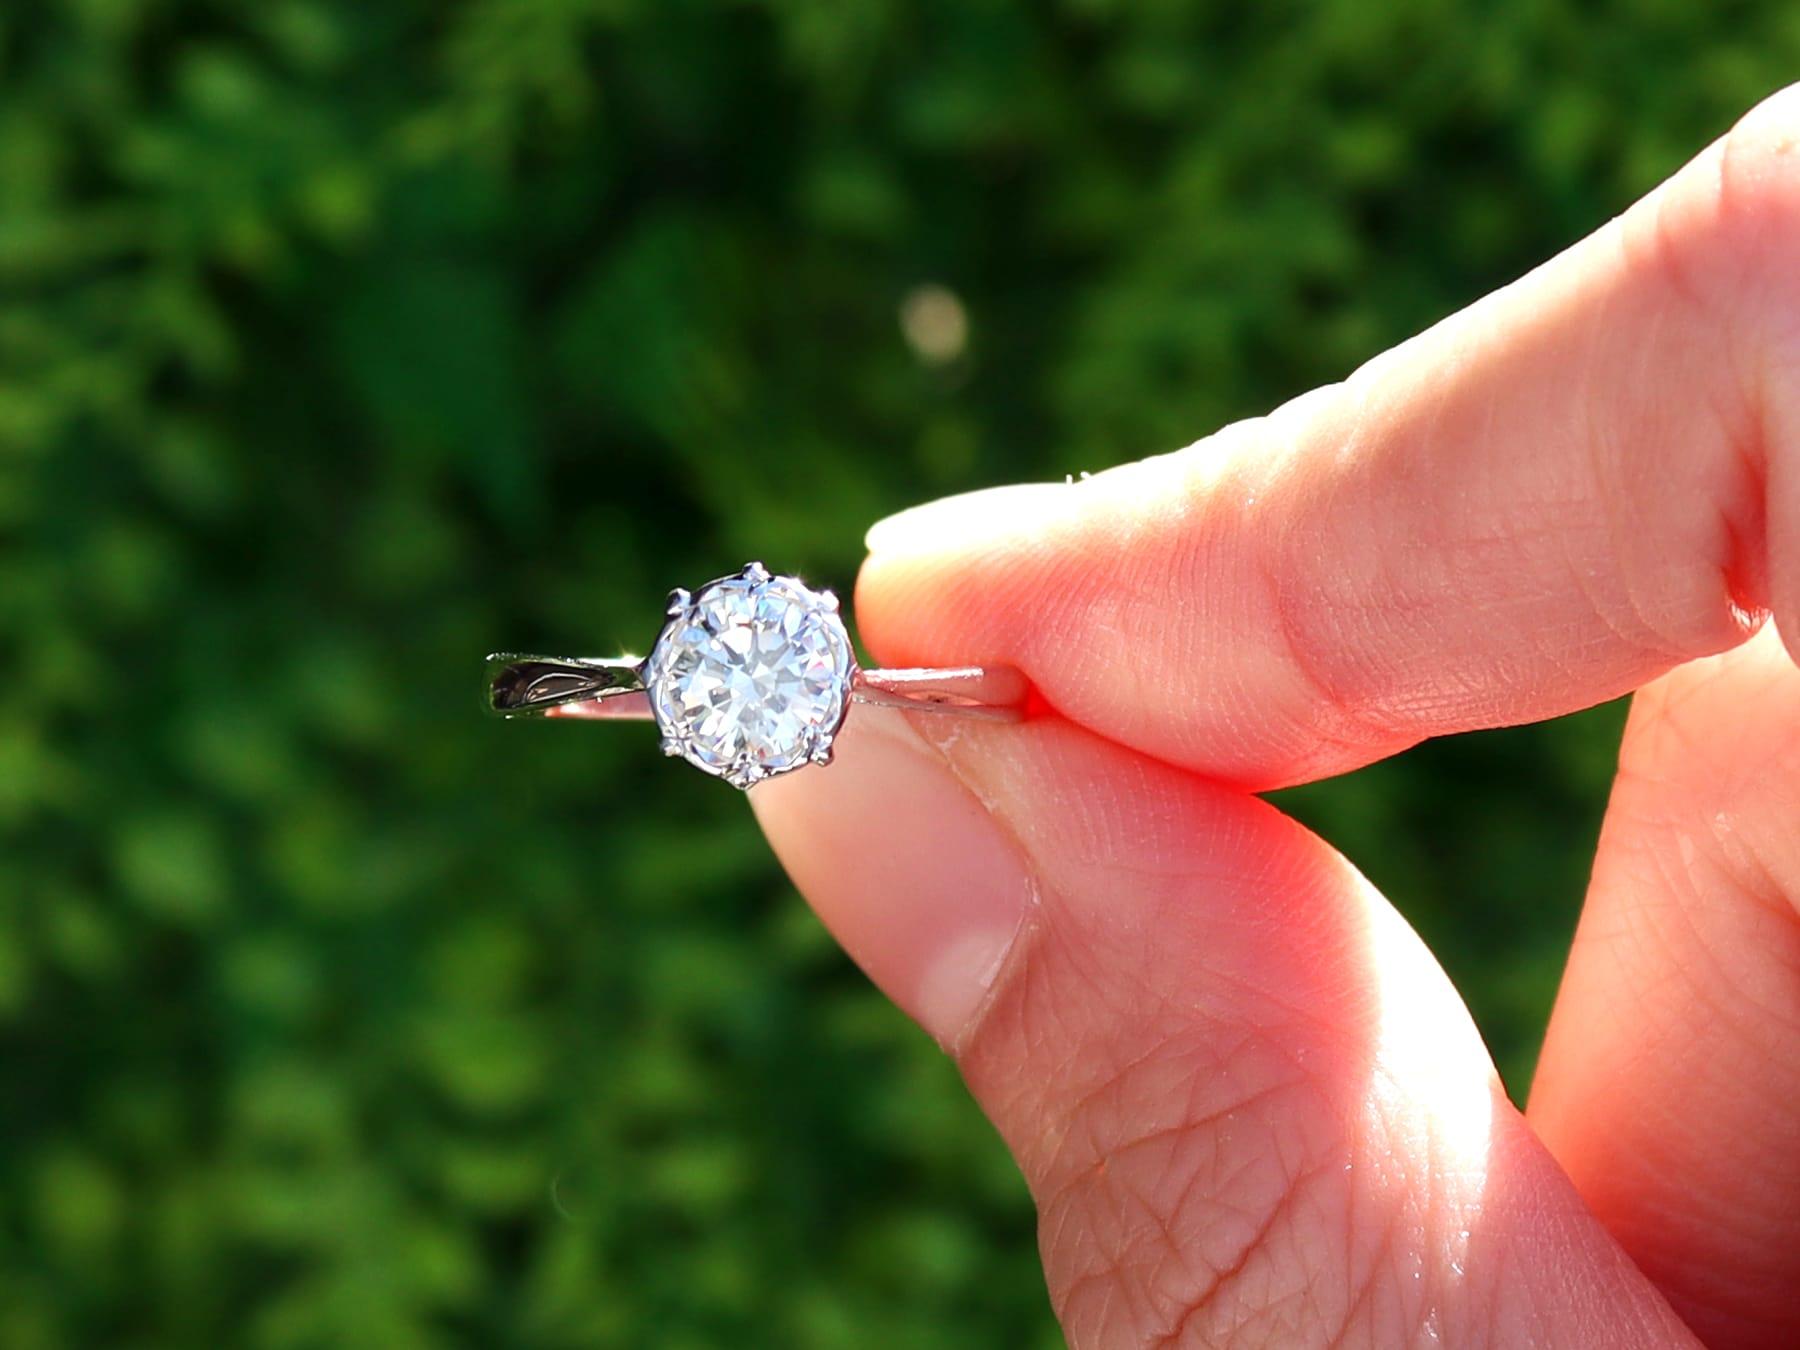 A stunning, fine and impressive 0.59 carat diamond and 18k white gold solitaire ring; part of our engagement ring collections

This stunning, fine and impressive antique solitaire diamond ring has been crafted in 18k white gold.

The pierced